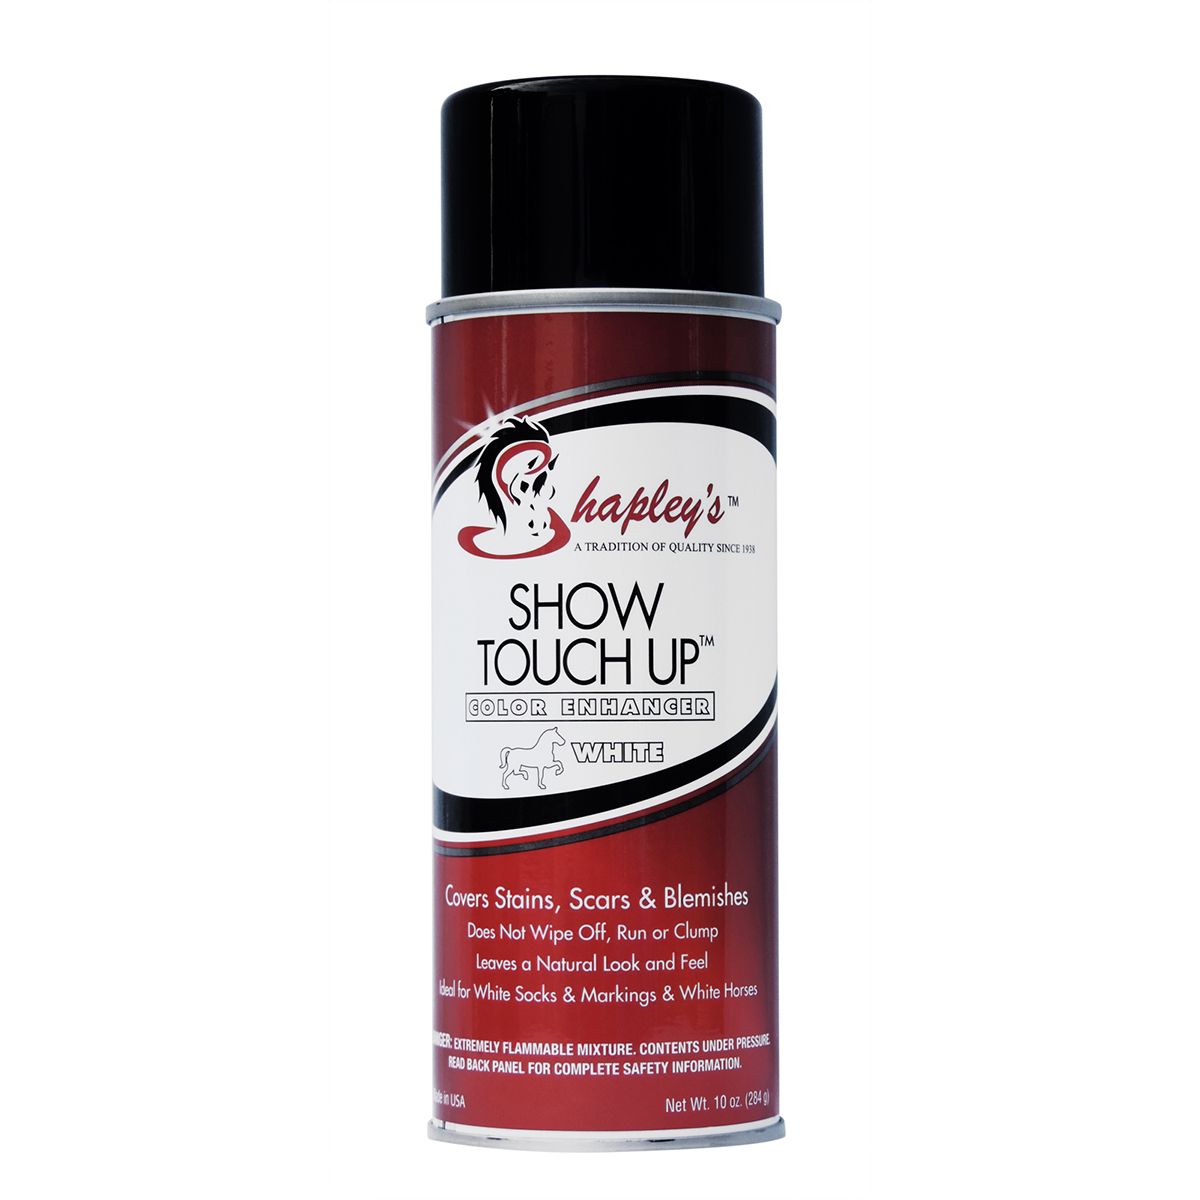 Shapley's Show Touch Up Color Enhancer for Horses